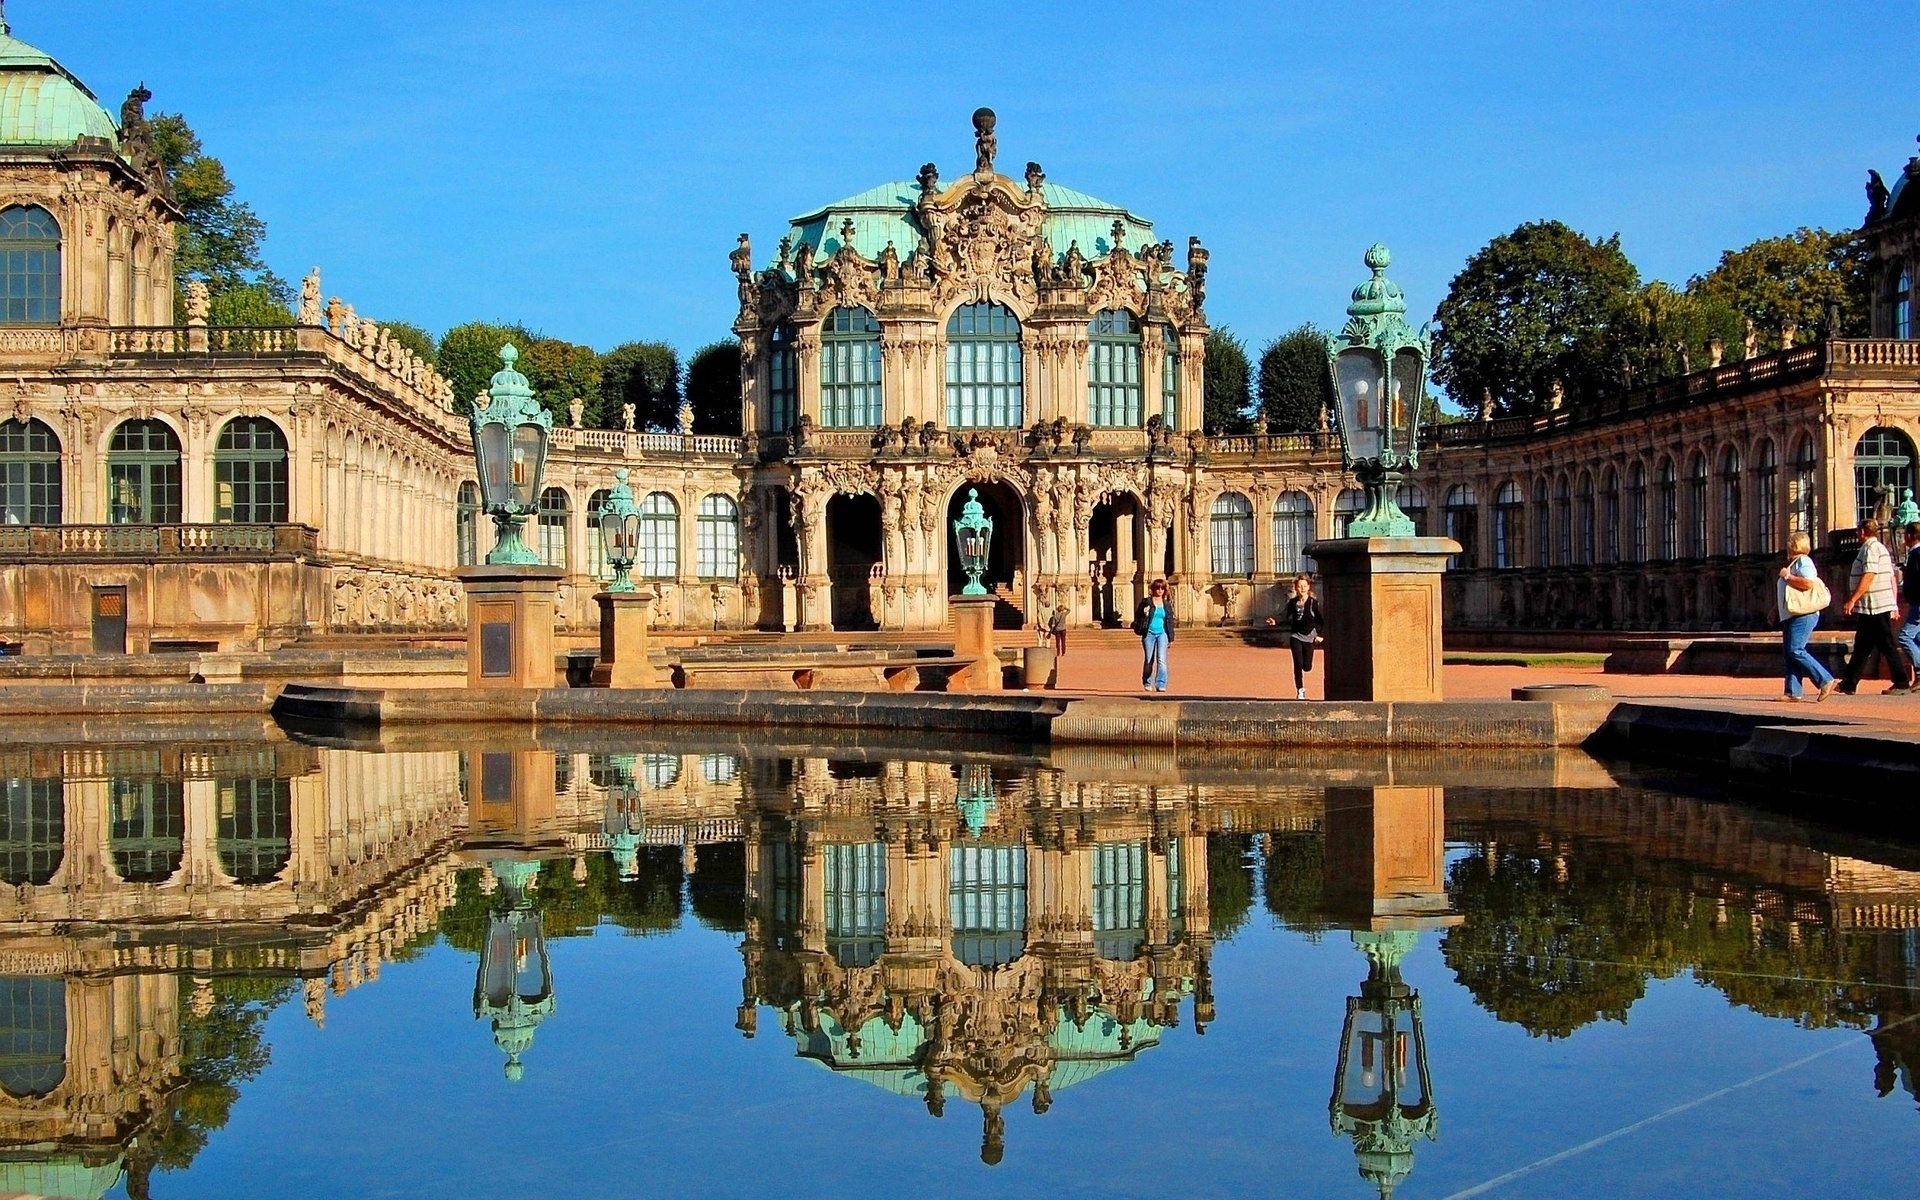 Dresden Zwinger Palace